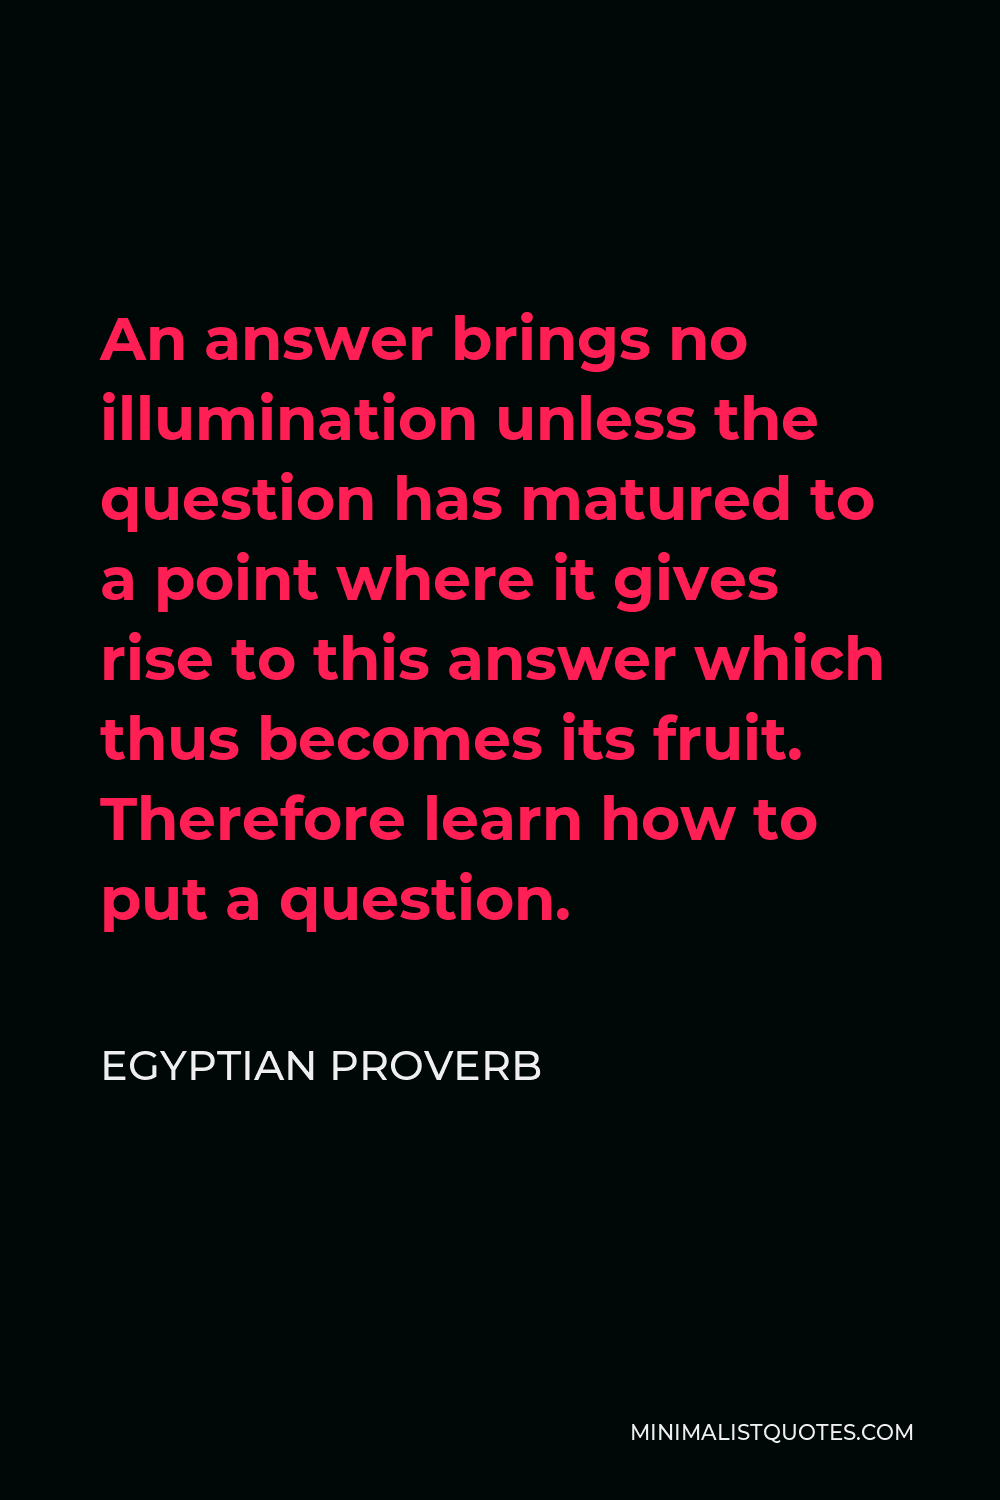 Egyptian Proverb Quote - An answer brings no illumination unless the question has matured to a point where it gives rise to this answer which thus becomes its fruit. Therefore learn how to put a question.